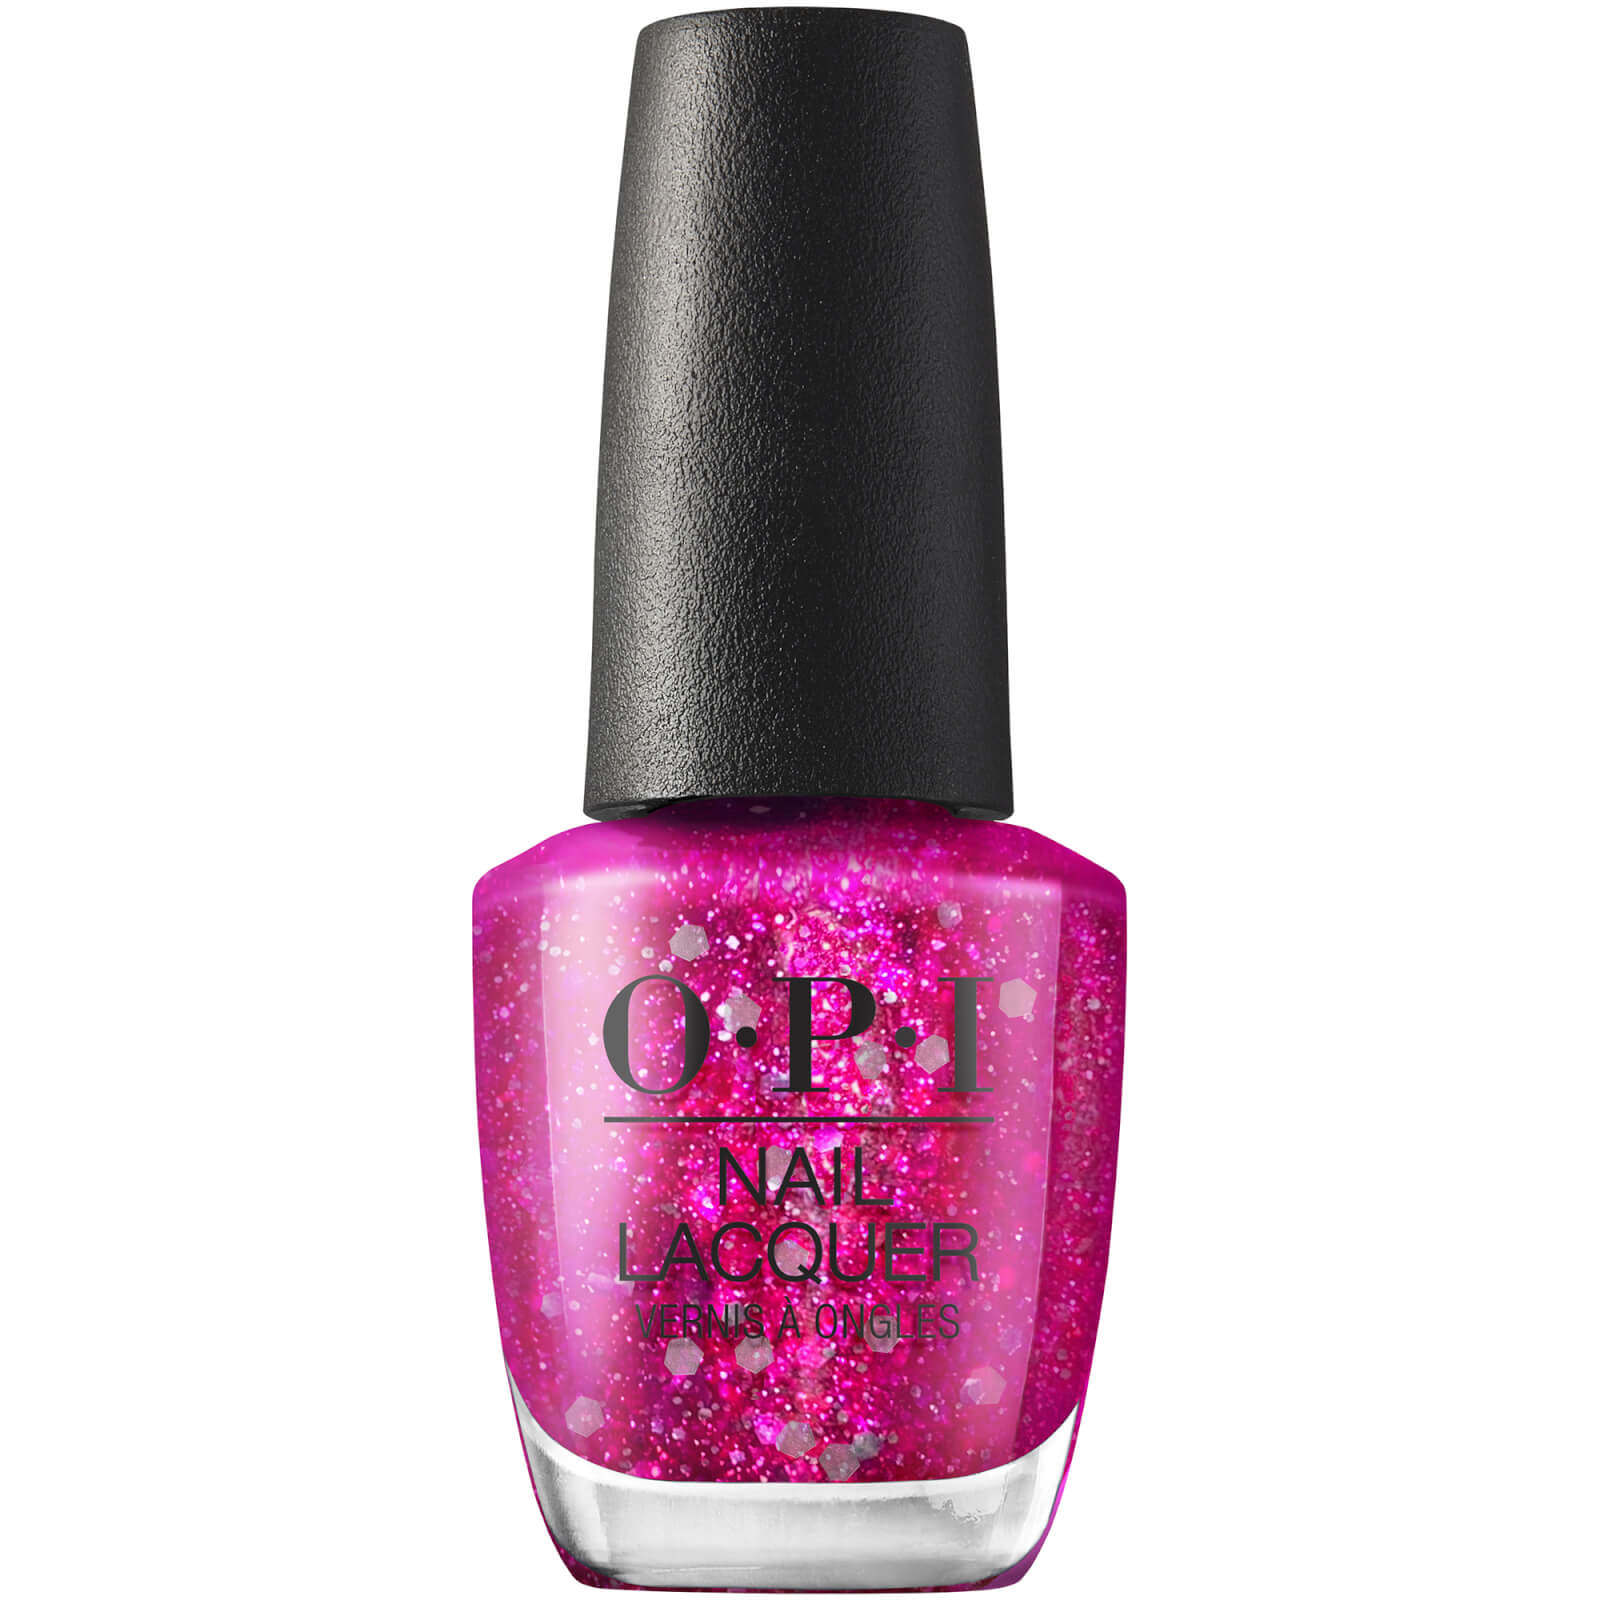 Opi Jewel Be Bold Collection Nail Lacquer 15ml (various Shades) - I Pink It's Snowing